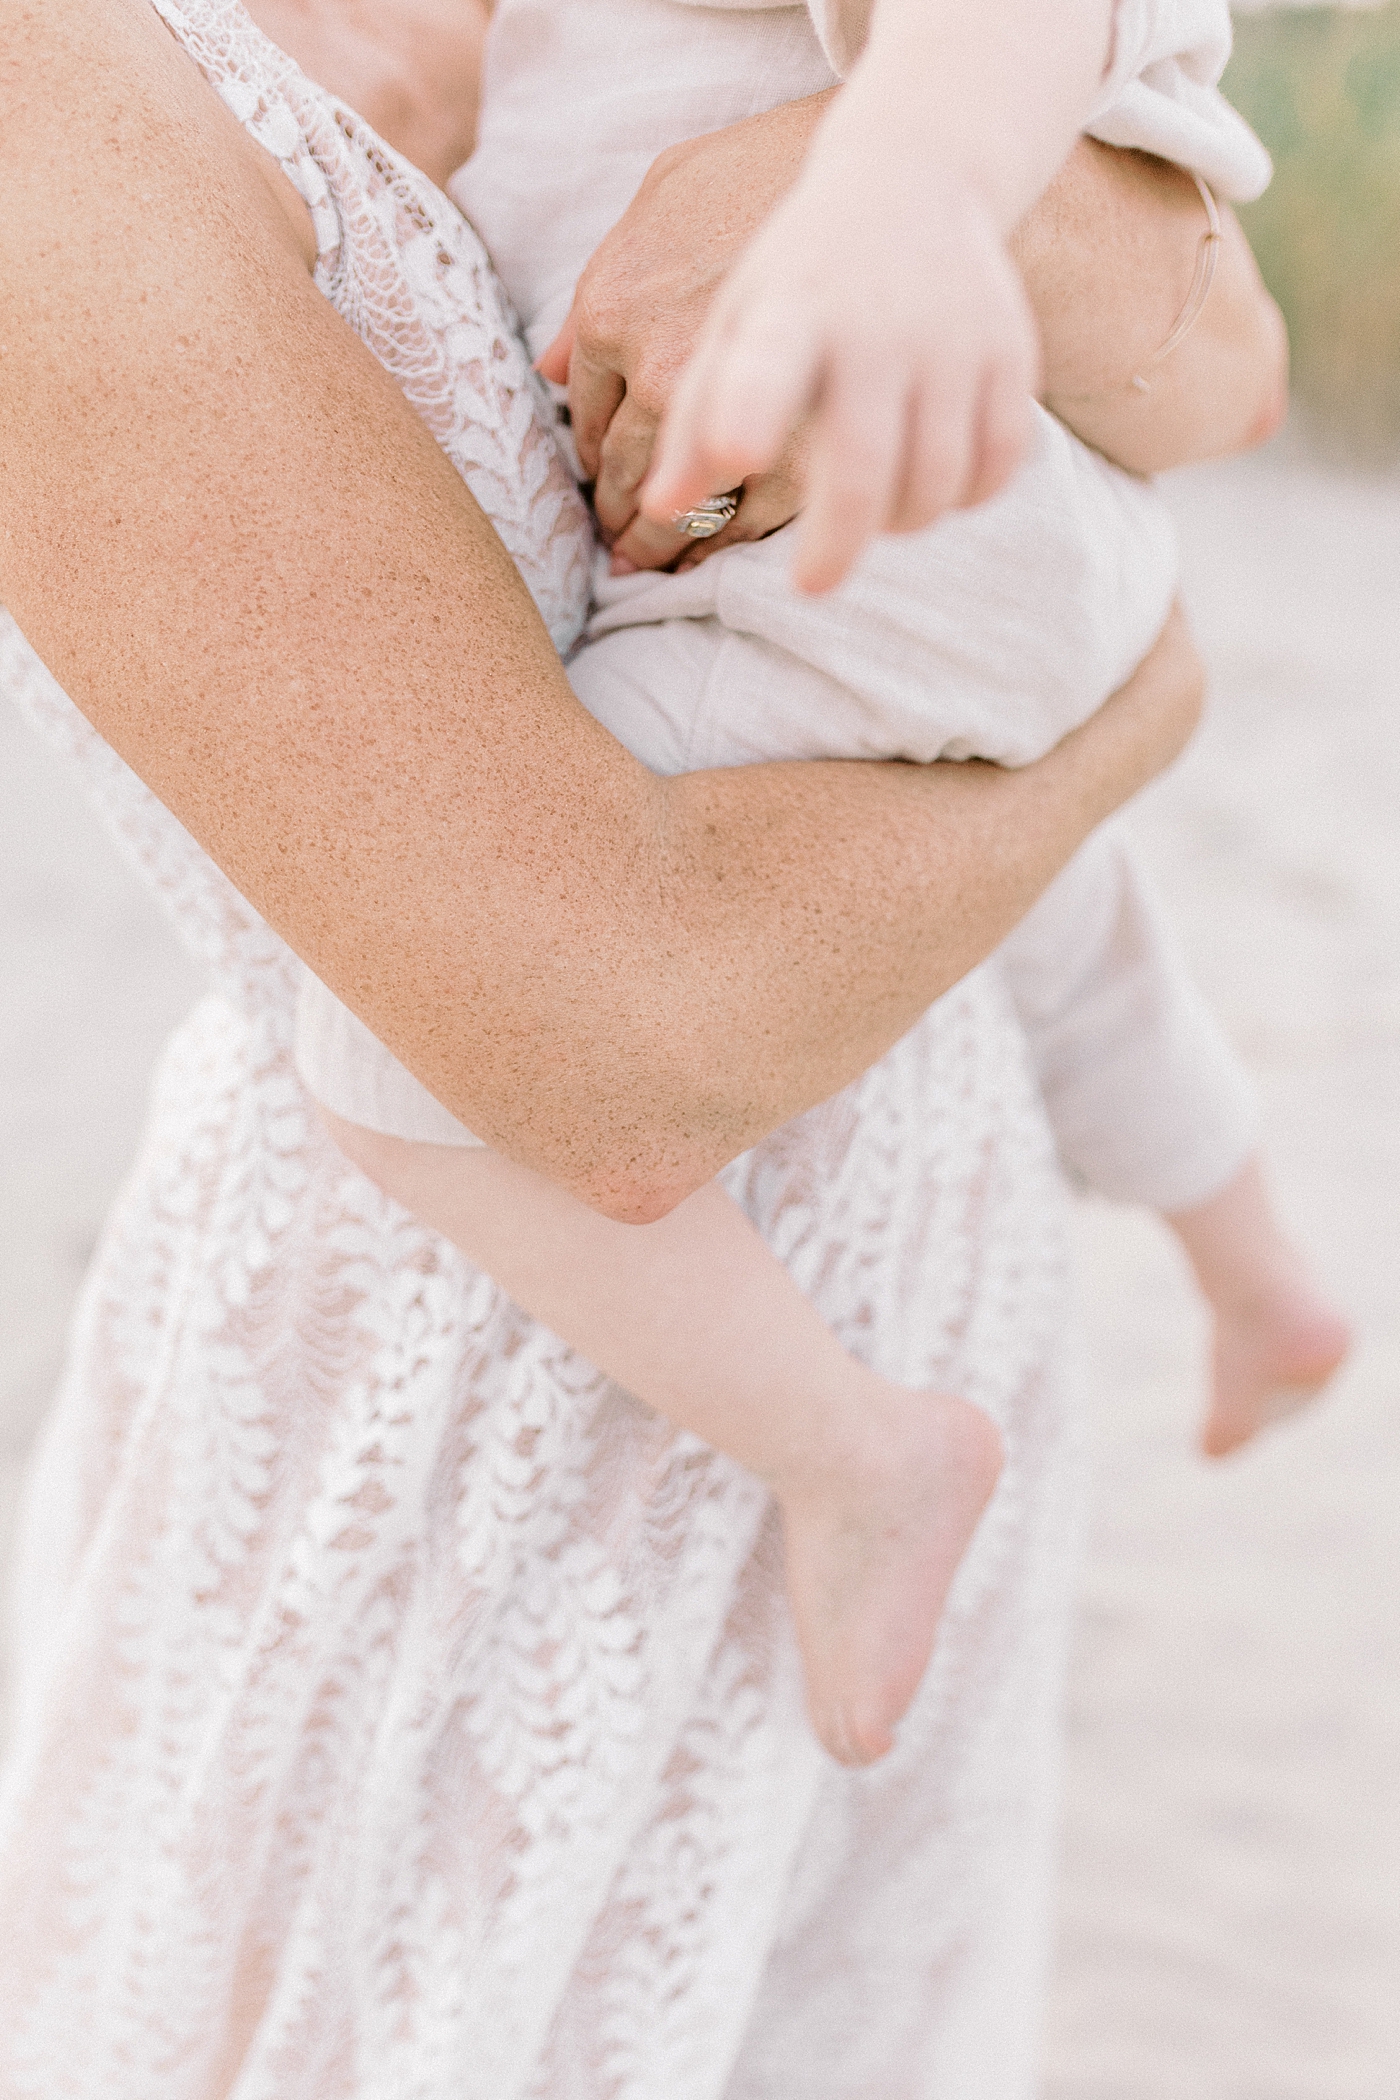 Detail of mom's hands holding her baby boy | Photo by Caitlyn Motycka Photography